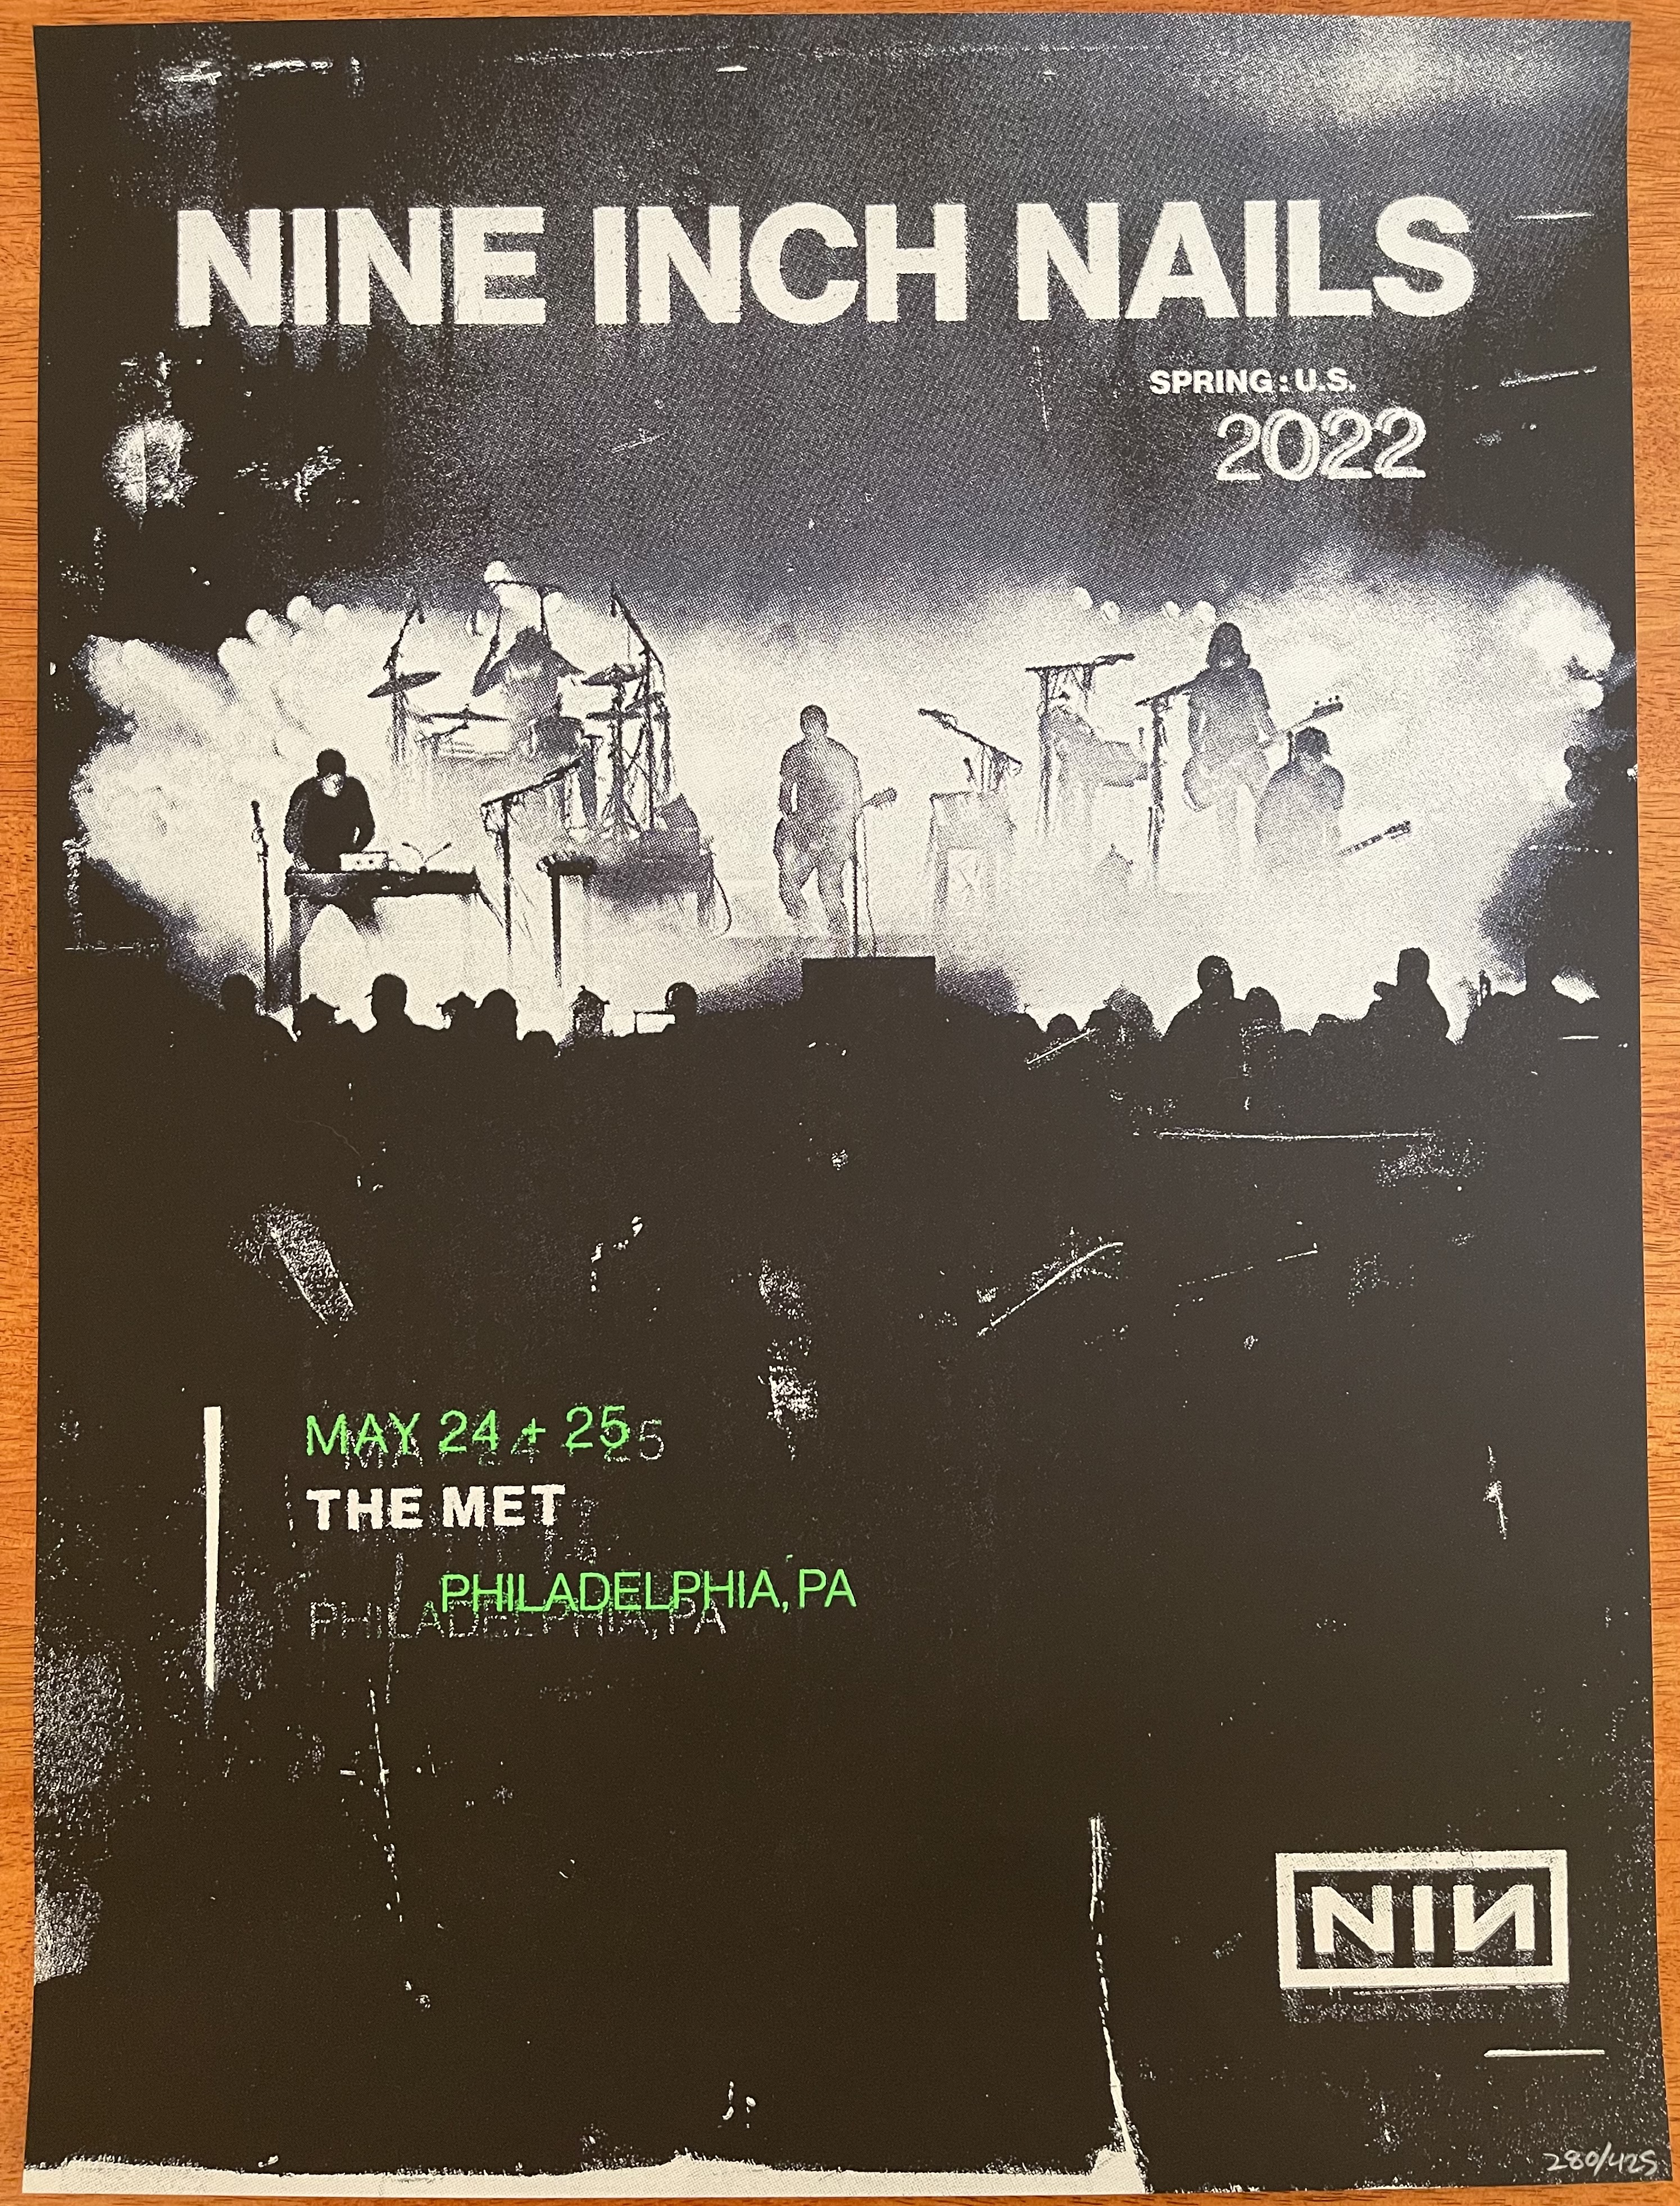 <a href='https://www.ebay.com/sch/i.html?_from=R40&_trksid=p2323012.m570.l1313&_nkw=Nine+Inch+Nails+Poster+Philadelphia&_sacat=0&mkcid=1&mkrid=711-53200-19255-0&siteid=0&campid=5336302525&customid=poster&toolid=10001&mkevt=1'>Buy this Poster!</a>